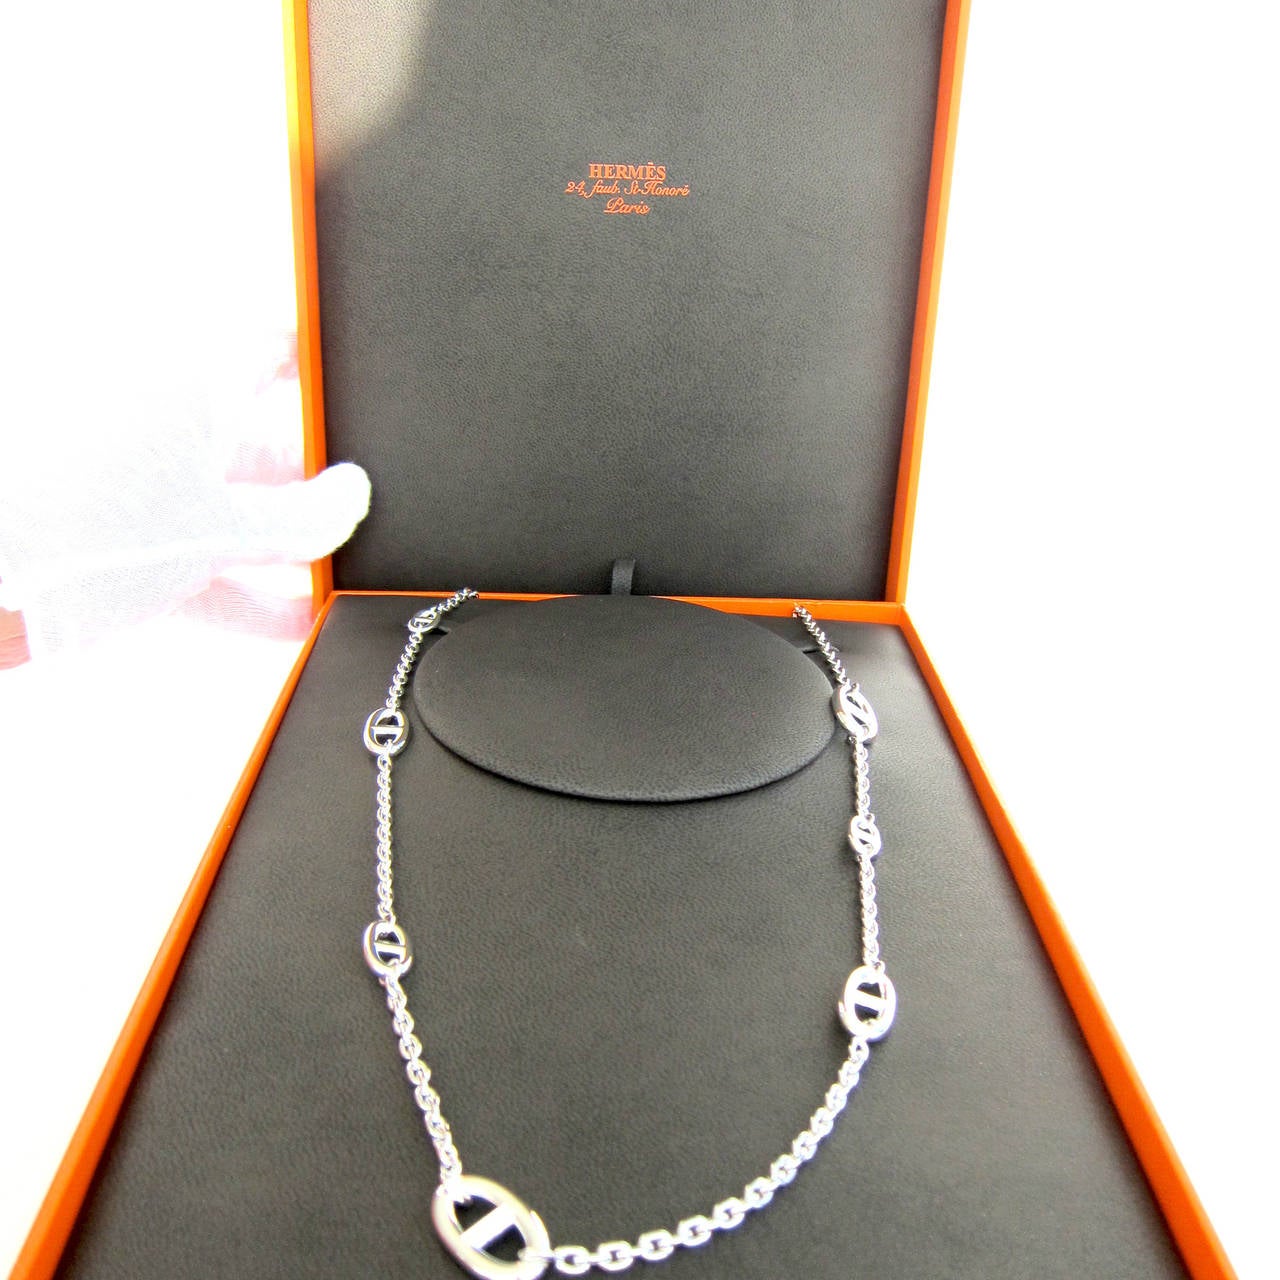 Hermes Farandole 80cm Long Solid Silver Necklace Classic

Perfect gift! Brand New in Box, never worn
Below retail plus tax of $1,551 where we are
Comes store fresh with Hermes jewelry gift box and ribbon
Iconic and coveted Hermes necklace
80cm